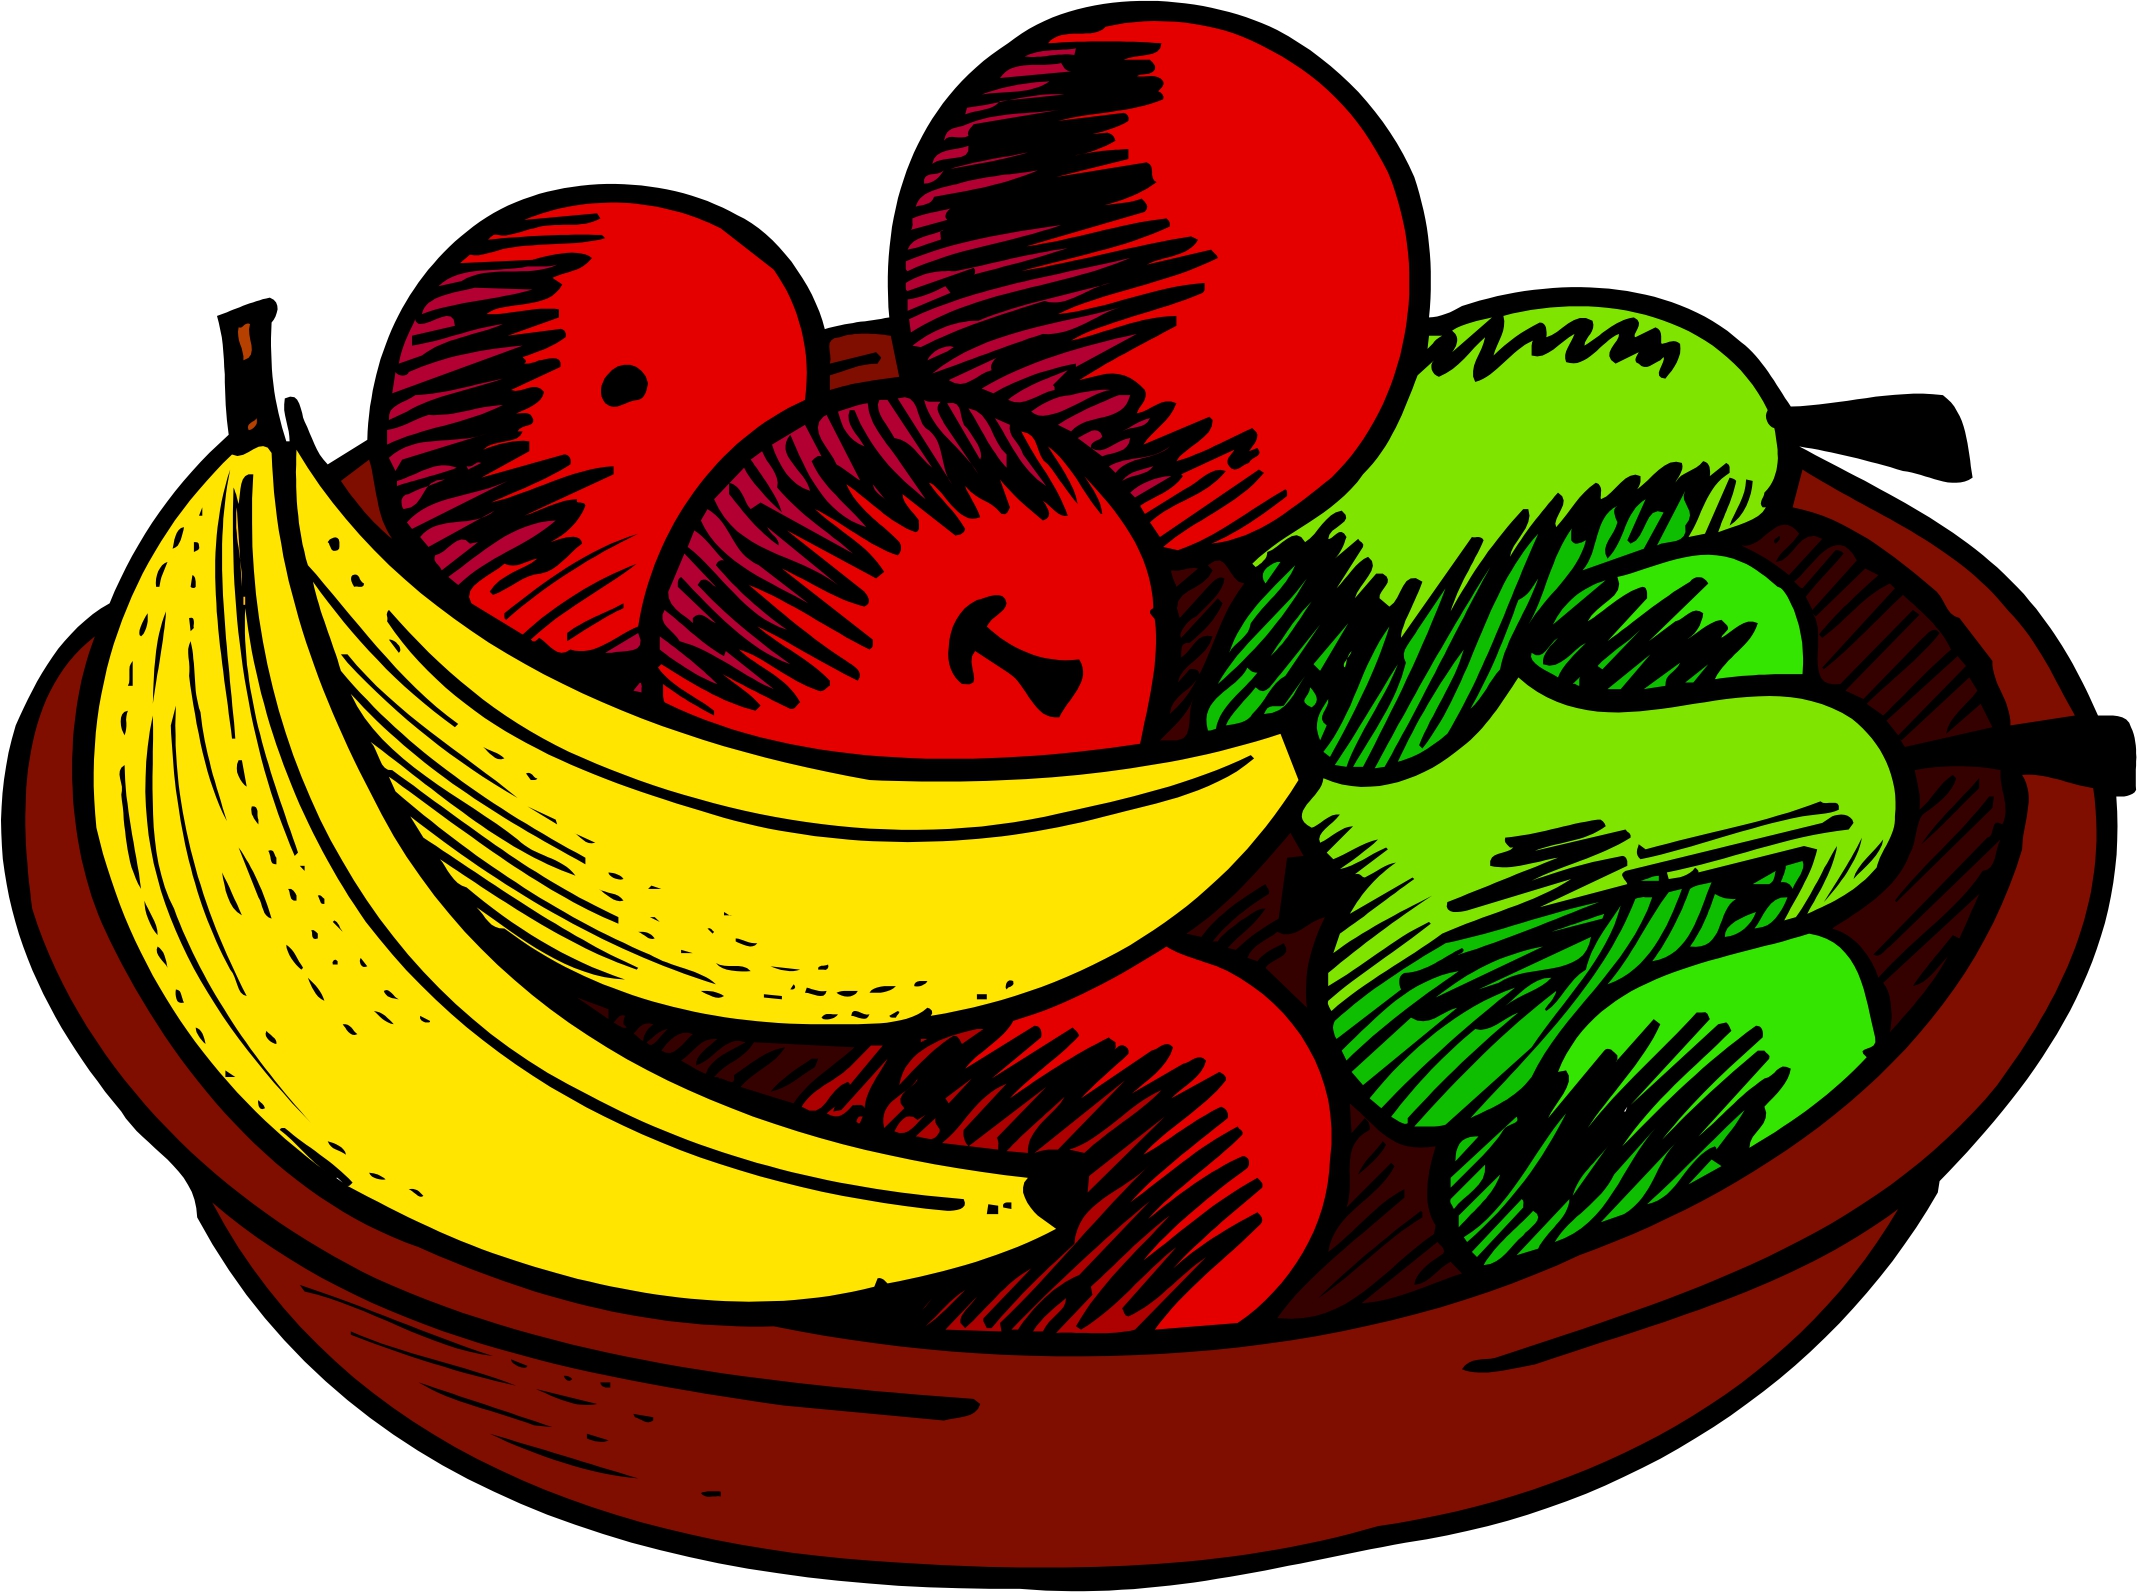 Clip Arts Related To : fruits in the basket clipart. view all fruit-bas...